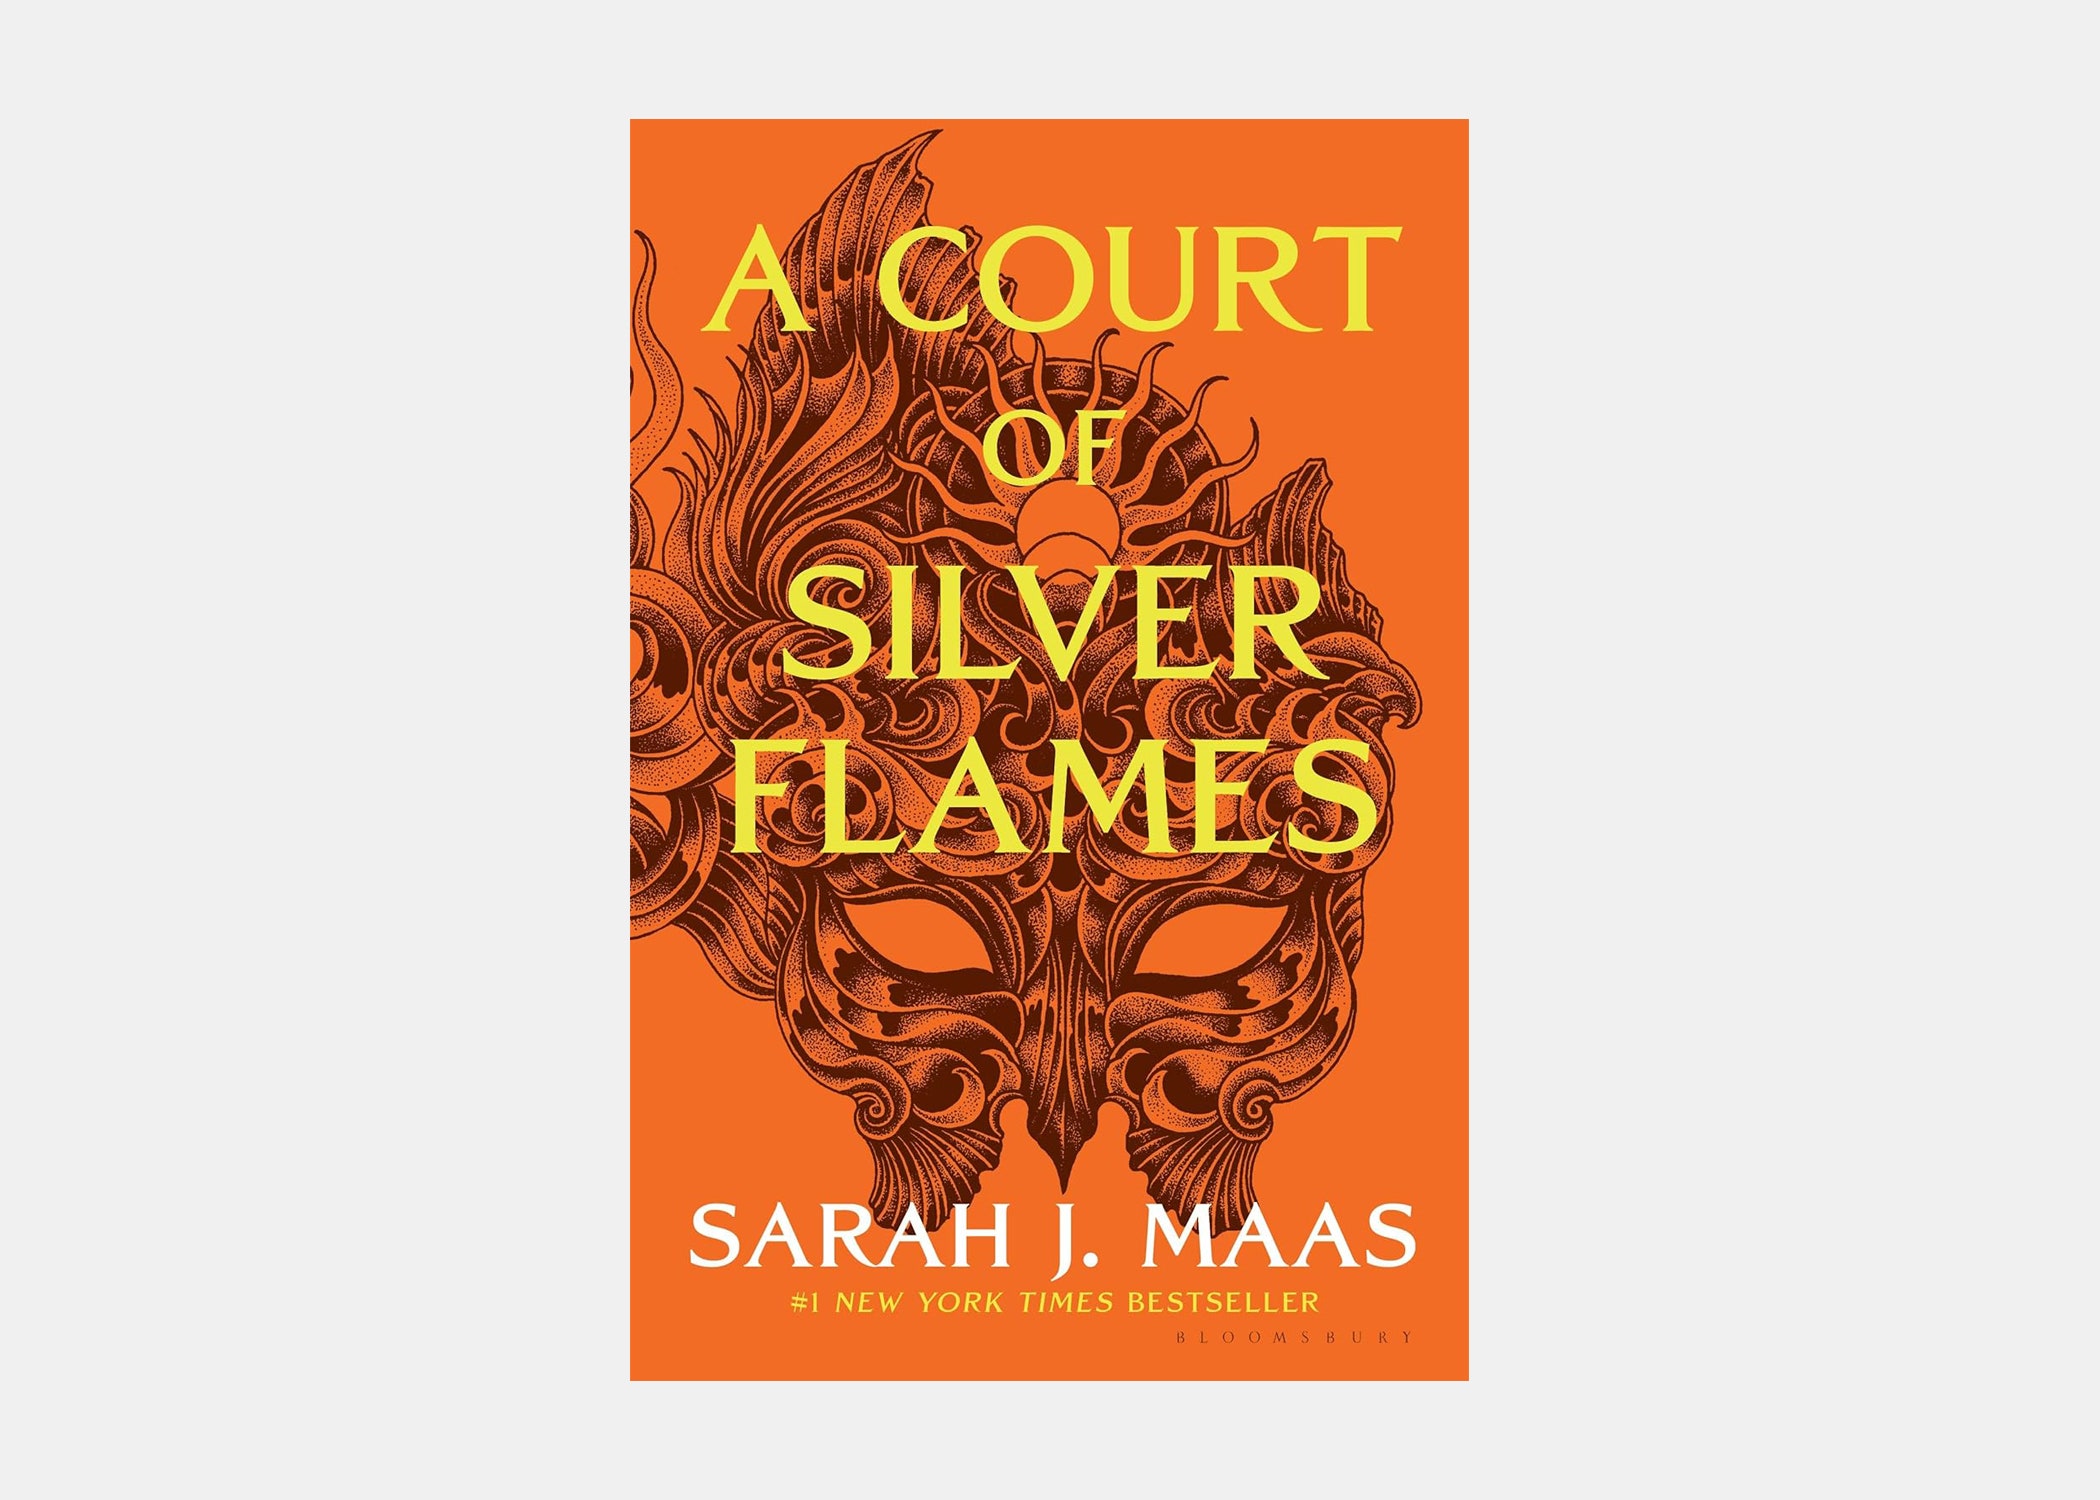 <p>The five-book <em>A Court of Thorns and Roses</em> series has gone viral in recent years. The fifth book, <em>A Court of Silver Flames,</em> follows Nesta Archeron after the war with Hybern and her connection with Cassian. It’s impressively long, making it perfect for an ultra-long flight.</p> <p><strong>Page count:</strong> 768</p> <p><strong>Average read time:</strong> 13 hours and 6 minutes</p> $14, Amazon. <a href="https://www.amazon.com/Court-Silver-Flames-Thorns-Roses/dp/1635577993/ref=tmm_pap_swatch_0">Get it now!</a><p>Sign up to receive the latest news, expert tips, and inspiration on all things travel</p><a href="https://www.cntraveler.com/newsletter/the-daily?sourceCode=msnsend">Inspire Me</a>